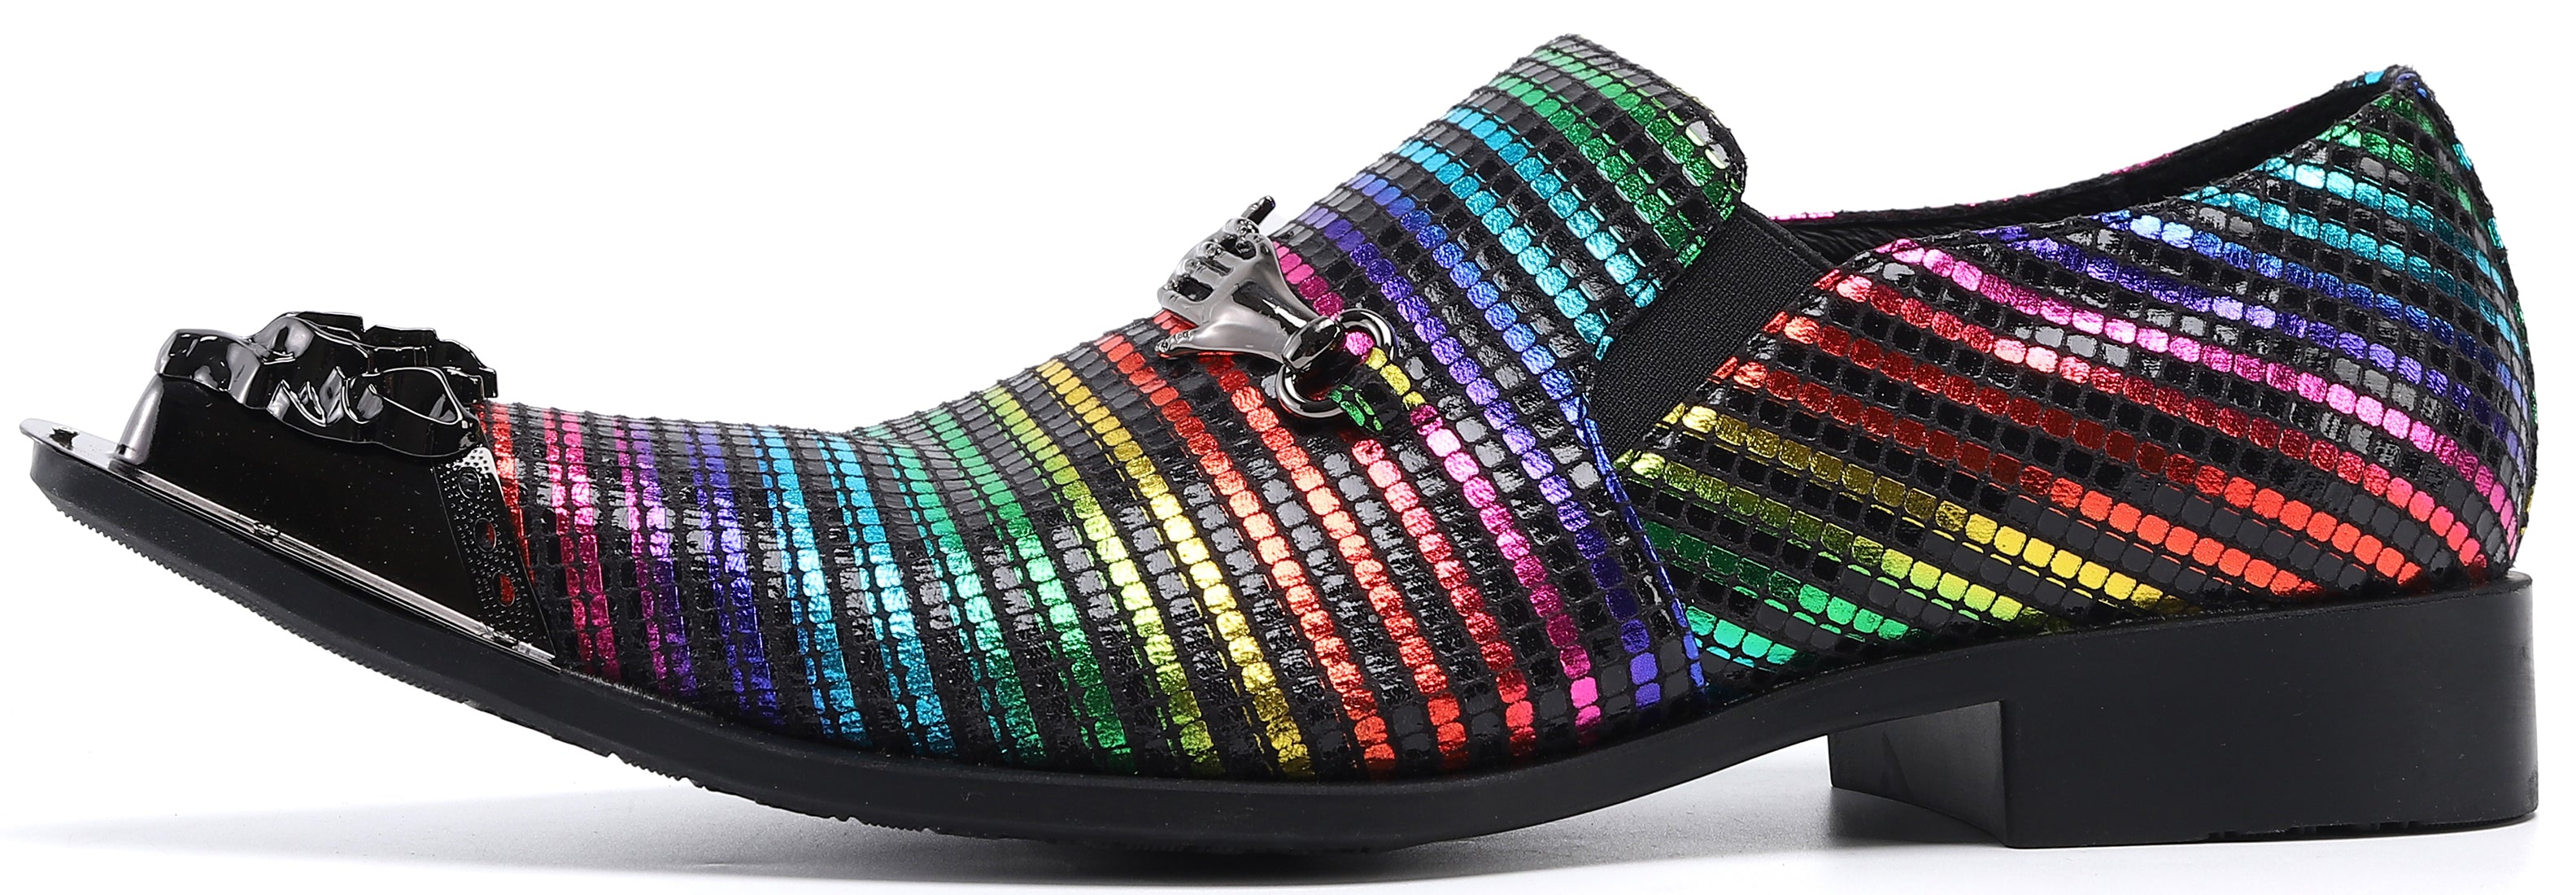 Men's Colorful Metal Tip Western Loafers